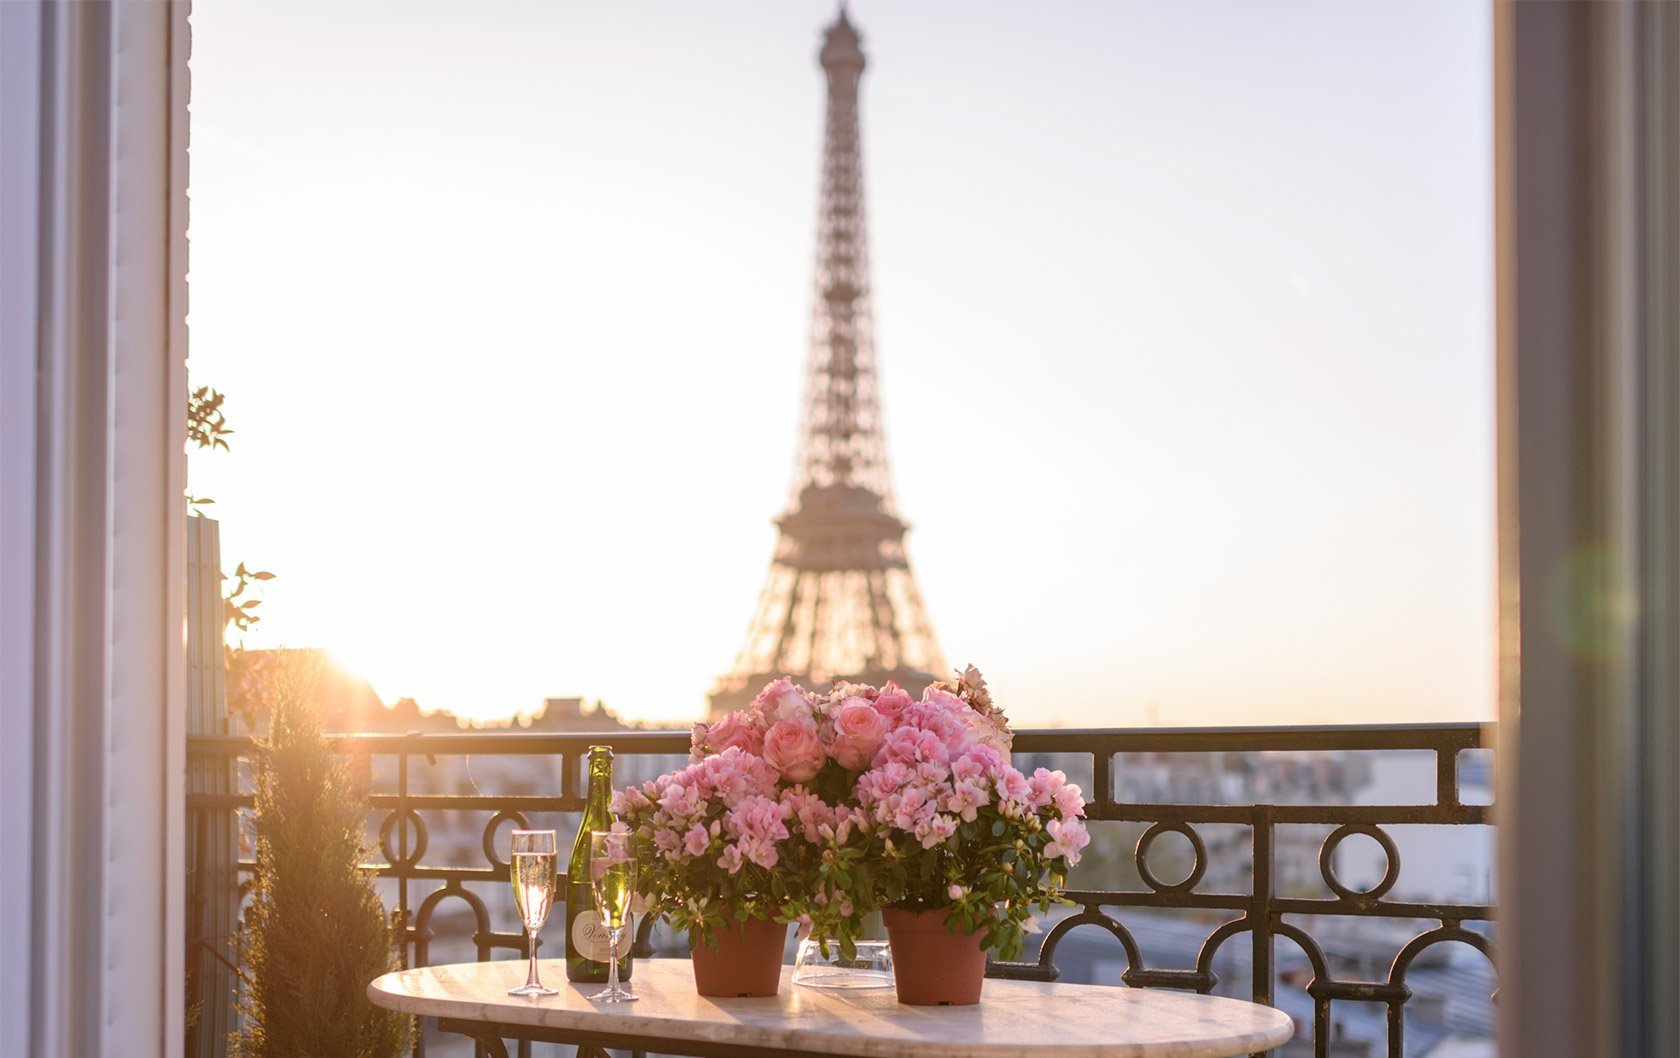 Paris Apartment Views that are Perfect for Daydreaming